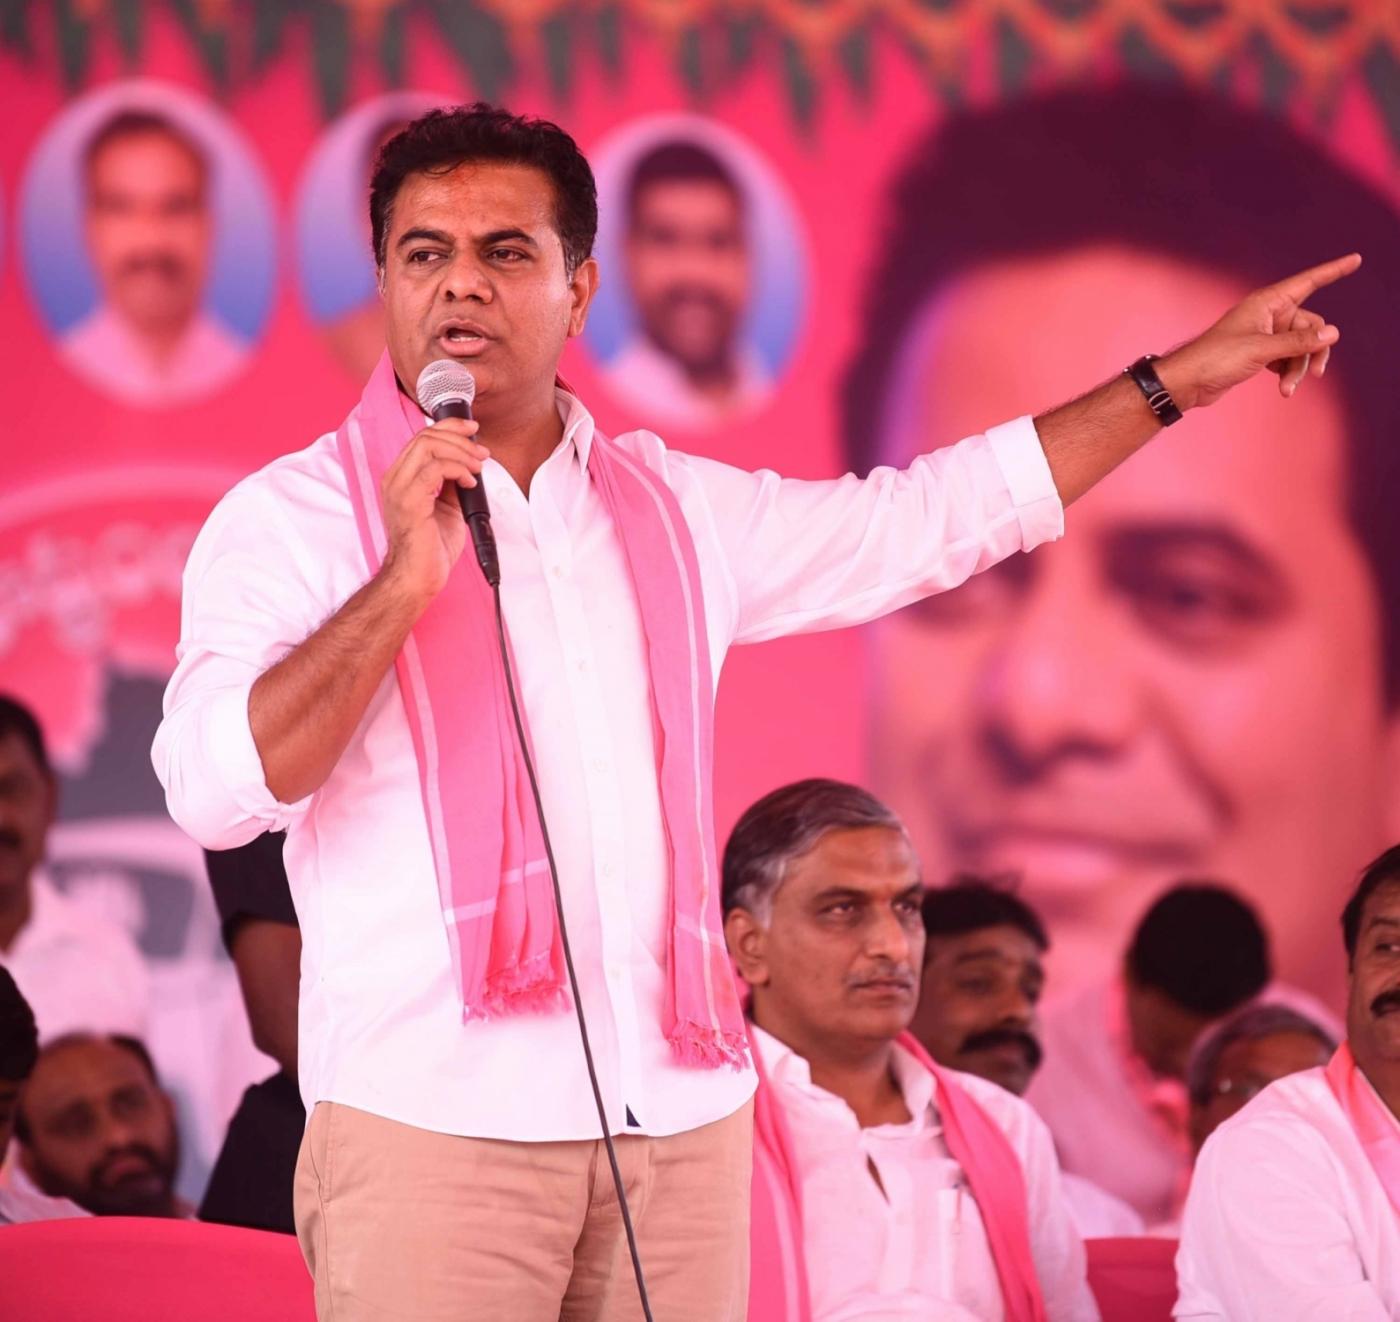 Medak: TRS Working President K T Rama Rao during a party programme in Medak district of Telangana on March 8, 2019. (Photo: IANS) by .